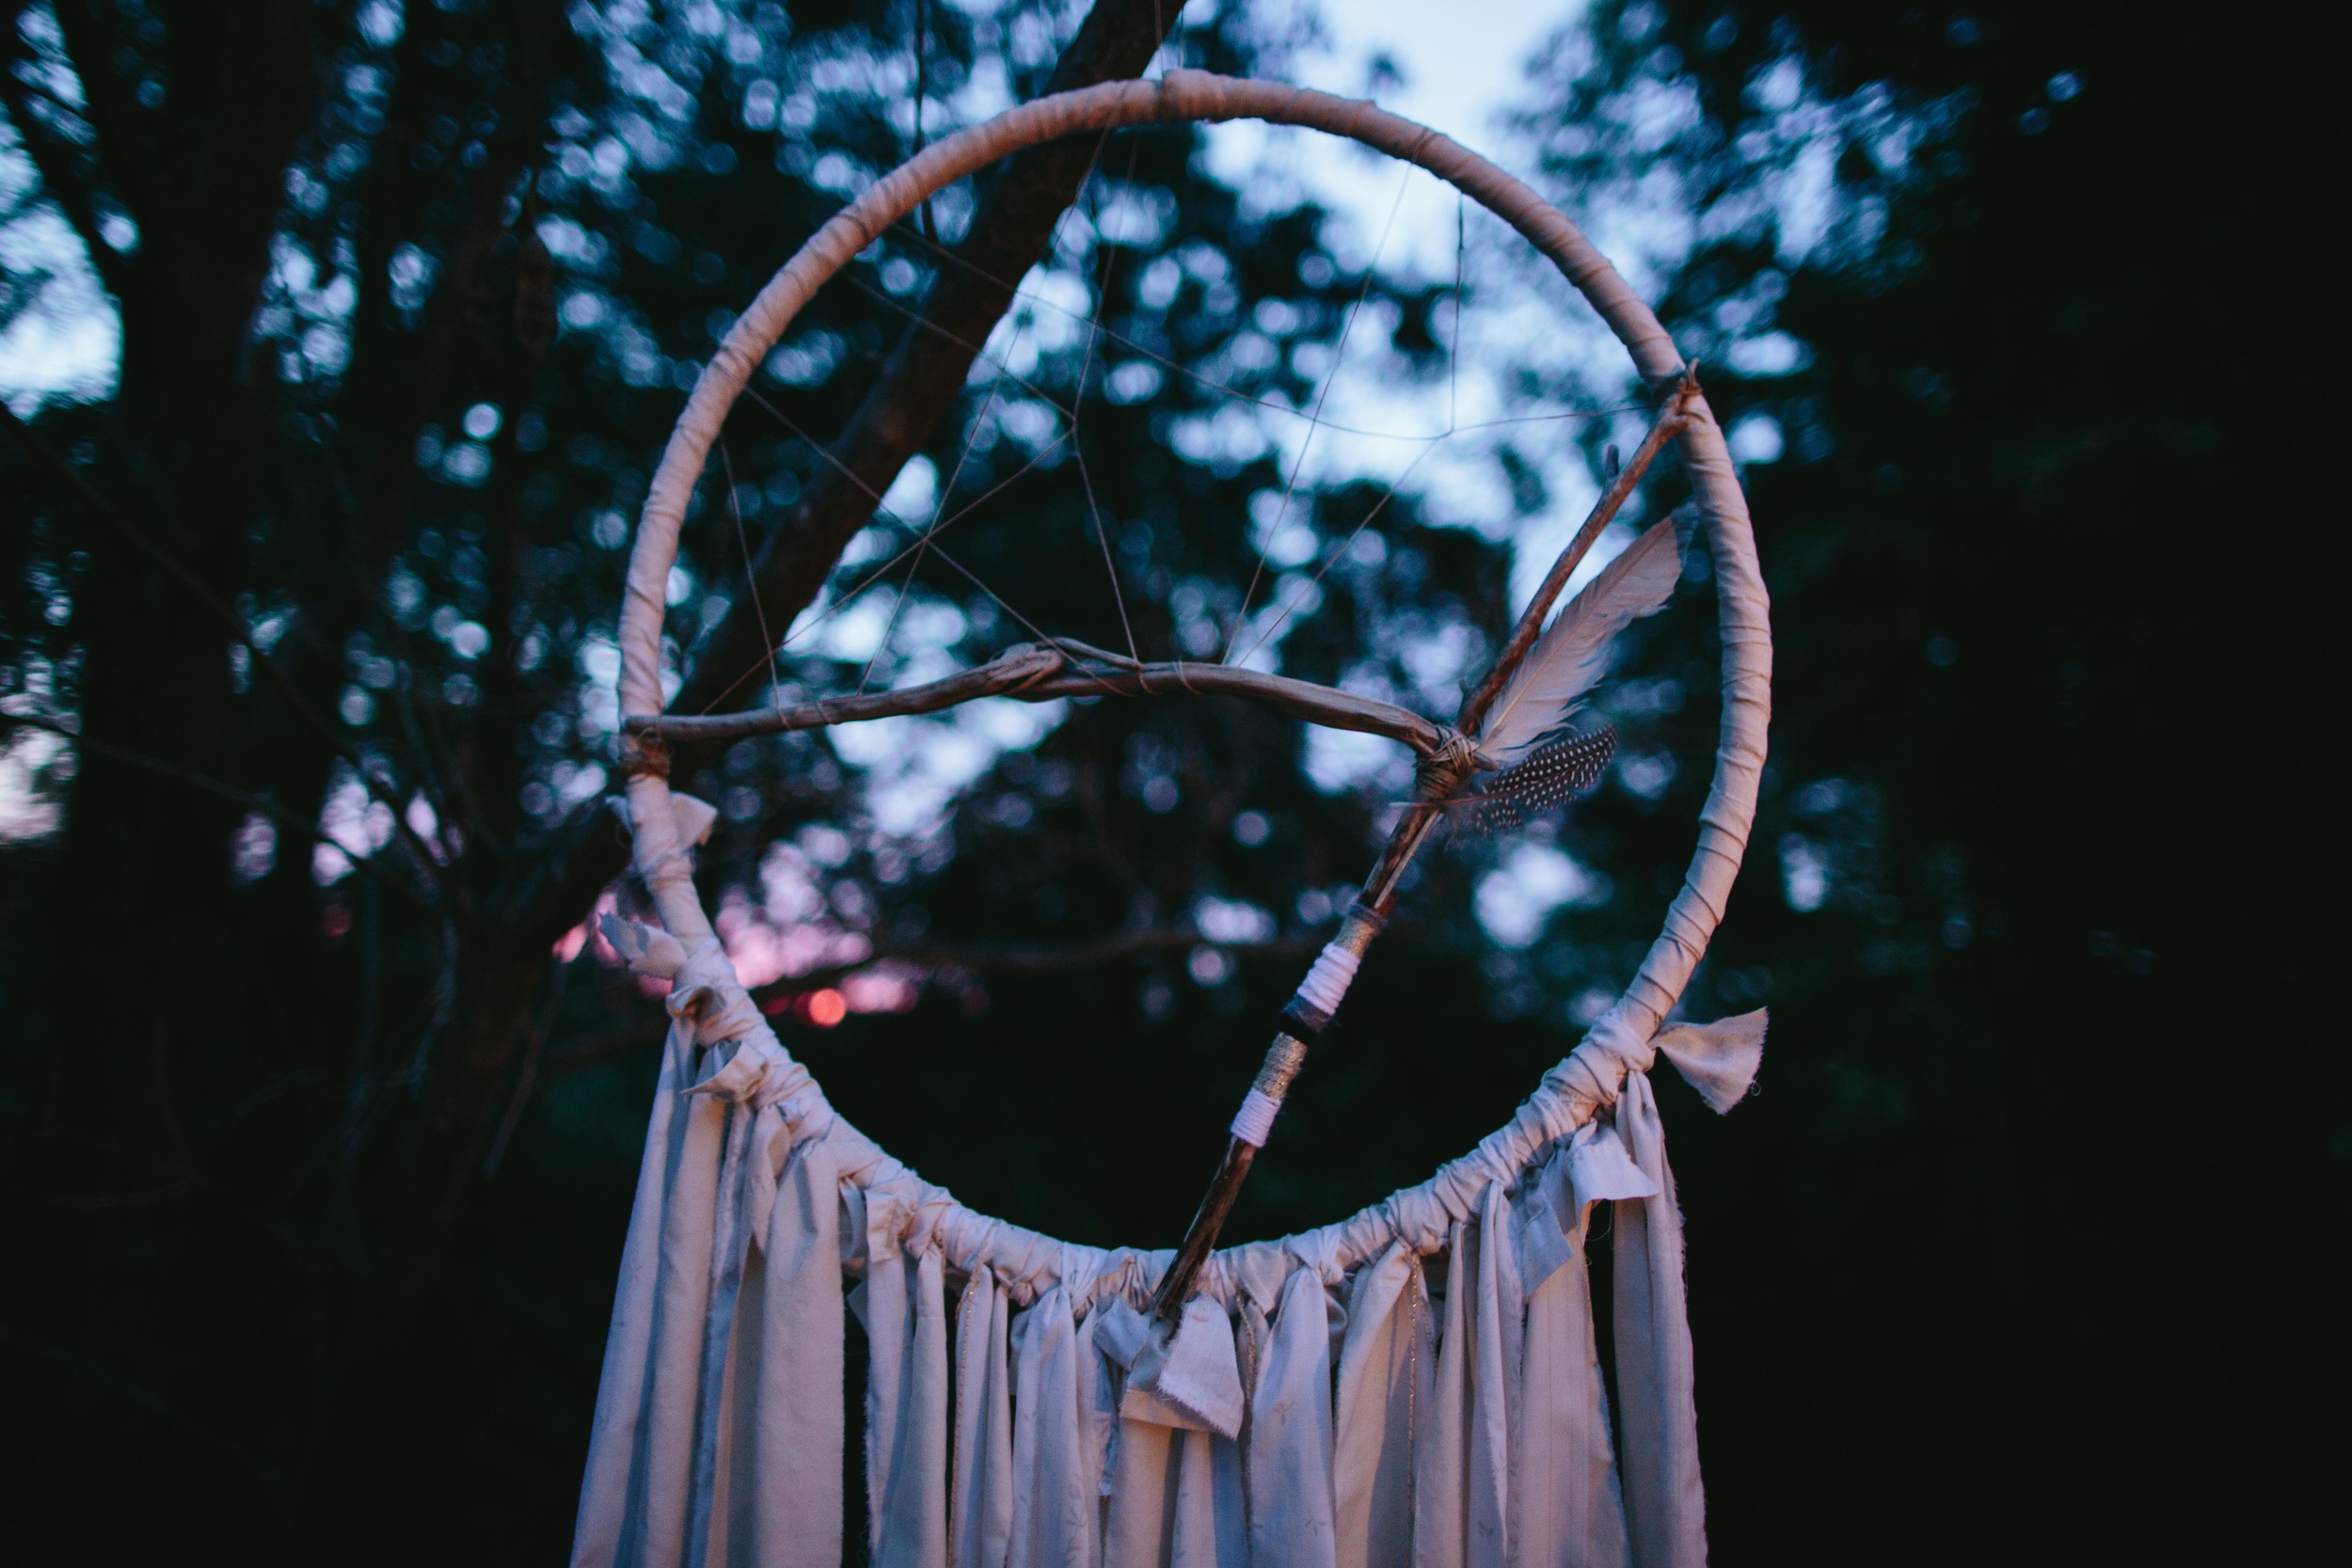 FOR THOSE WHO DREAM // A WORKSHOP BY THE ETERNAL CHILD & WILDFOLKCO